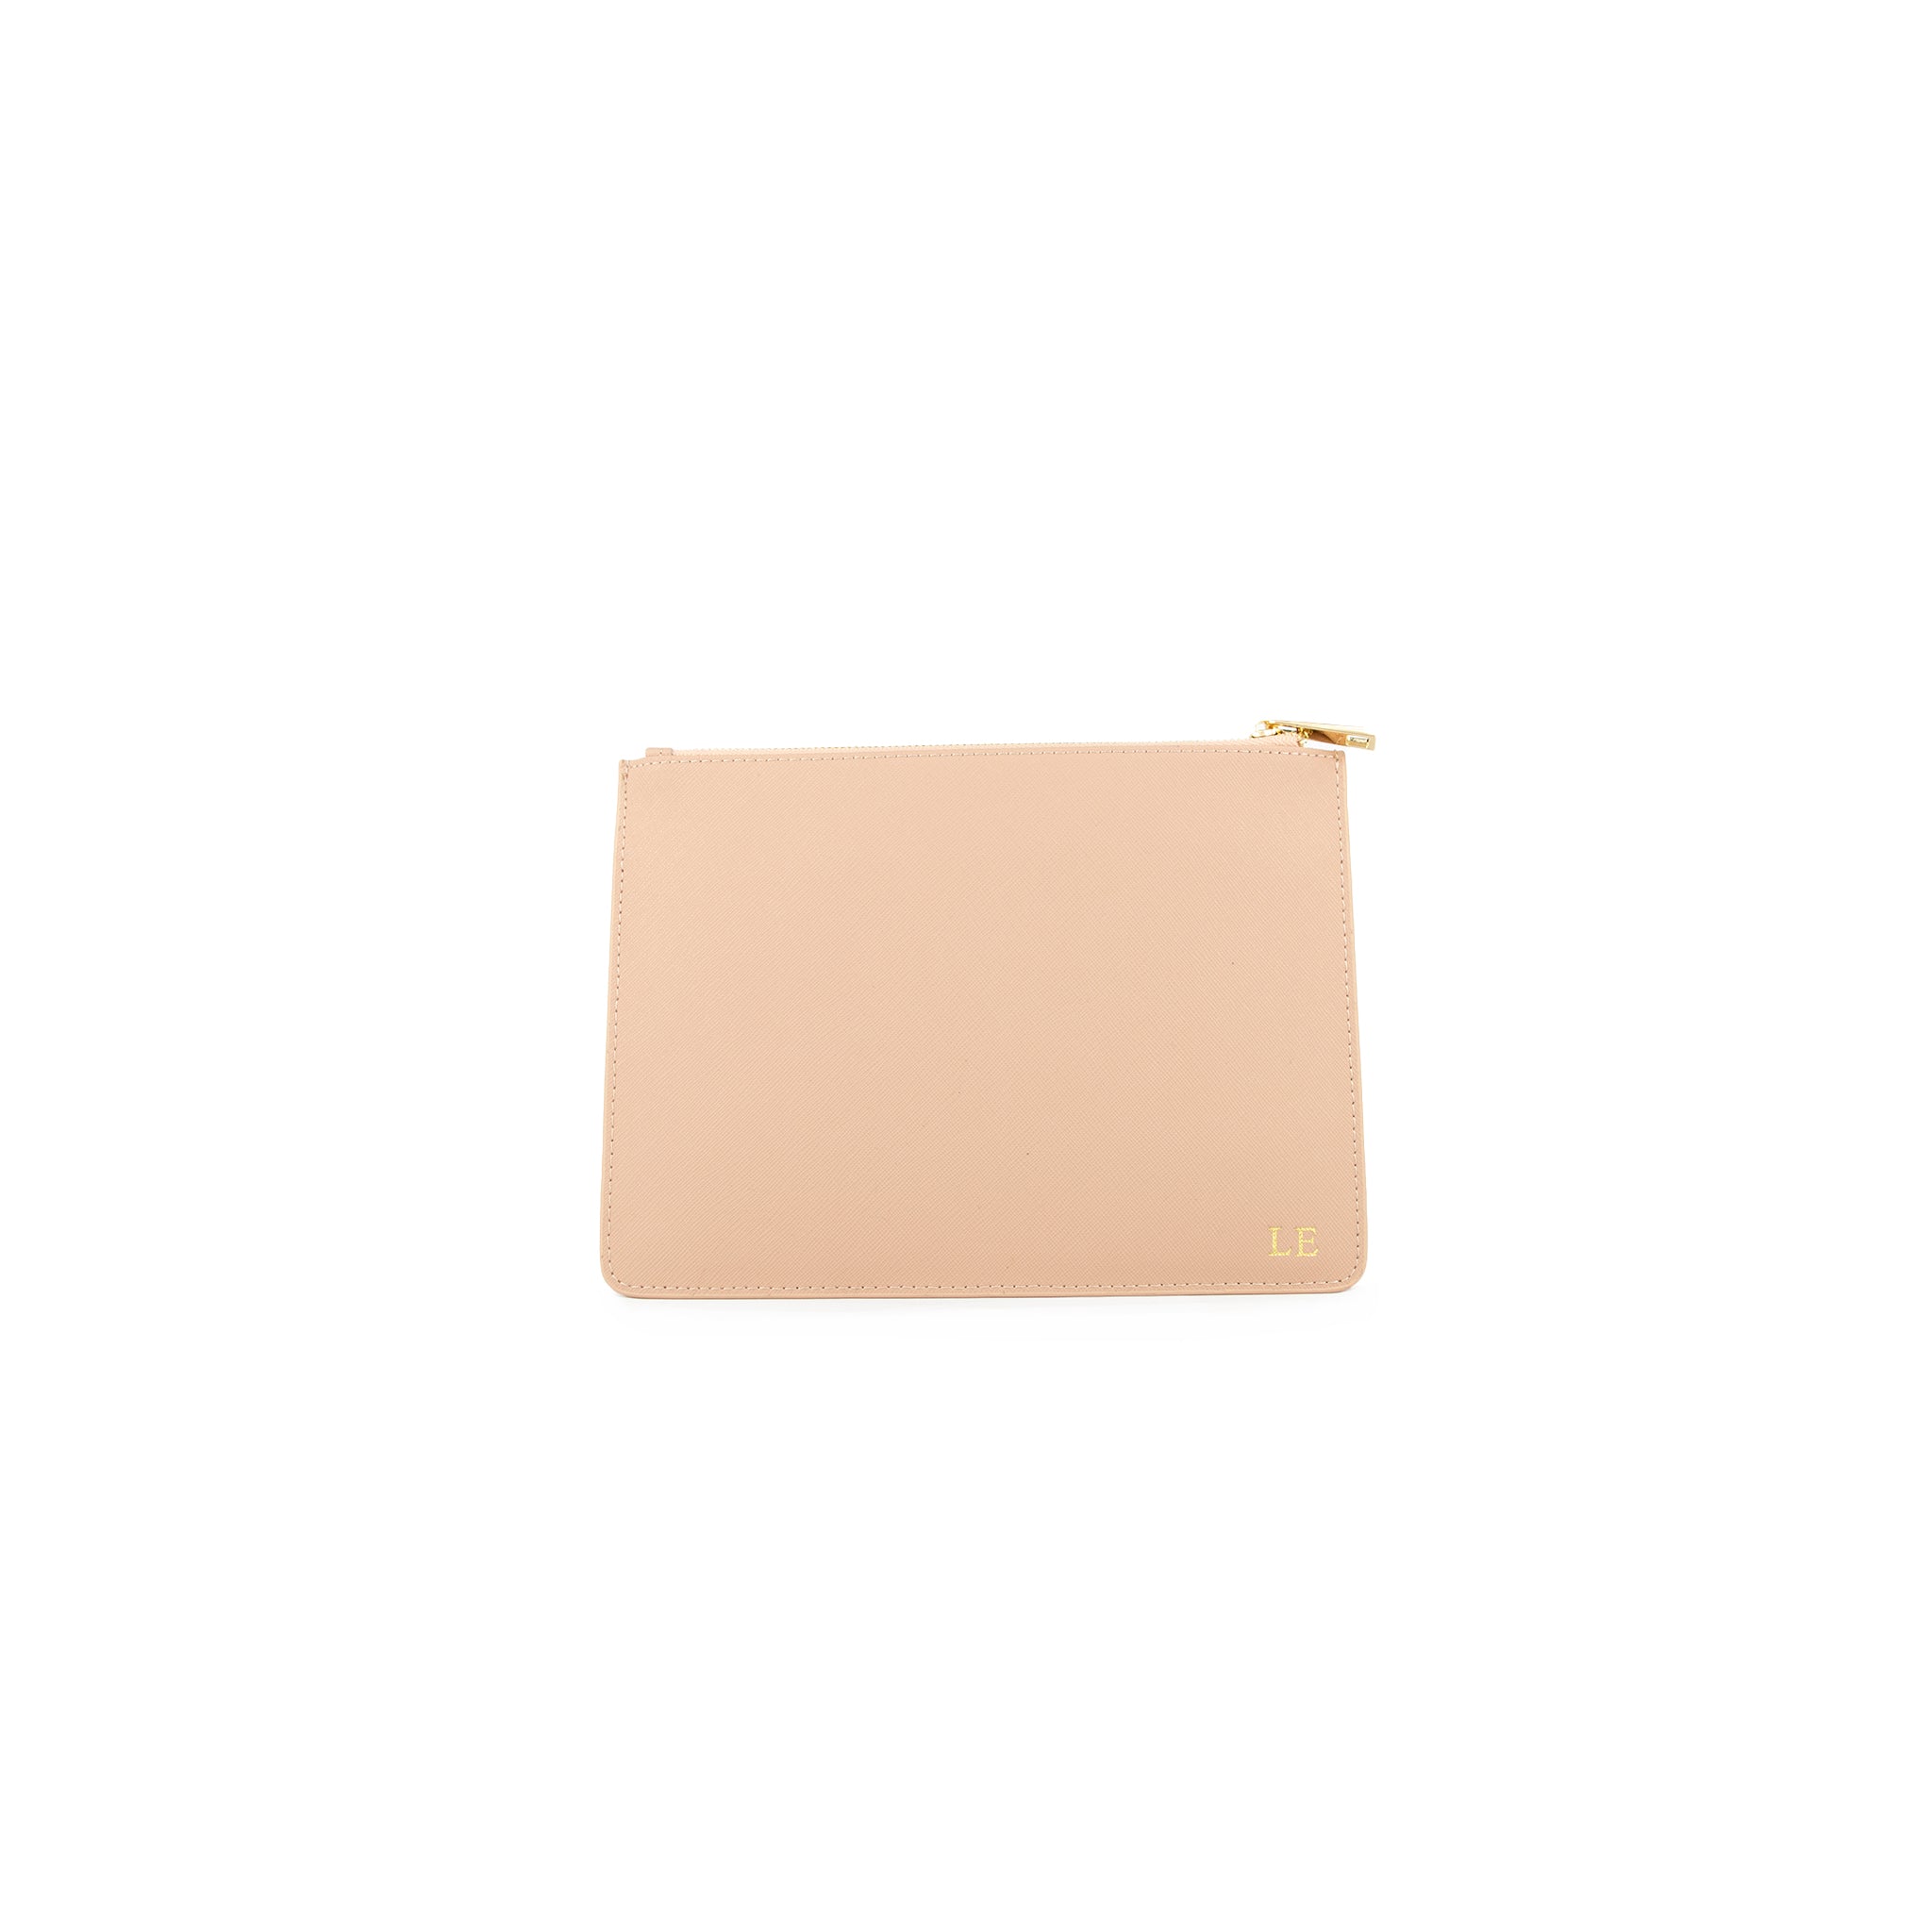 Personalised Nude Monogrammed Saffiano Leather Pouch